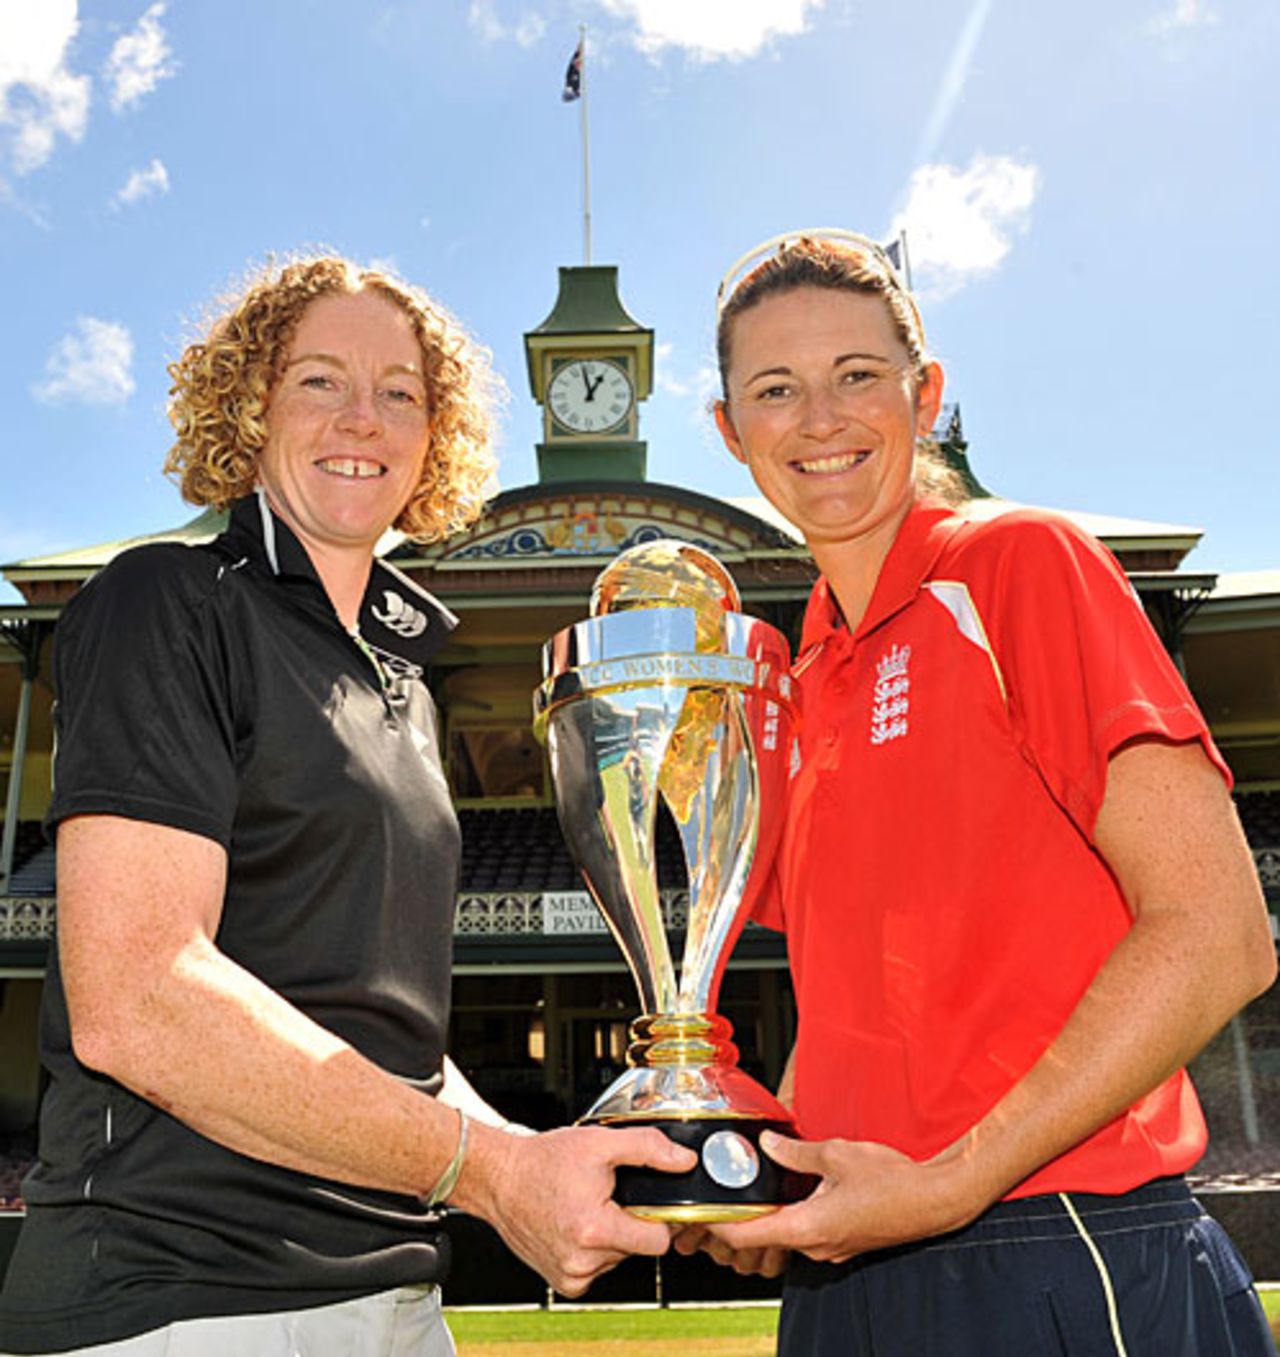 Haidee Tiffen and Charlotte Edwards with the World Cup trophy, SCG, March 21, 2009